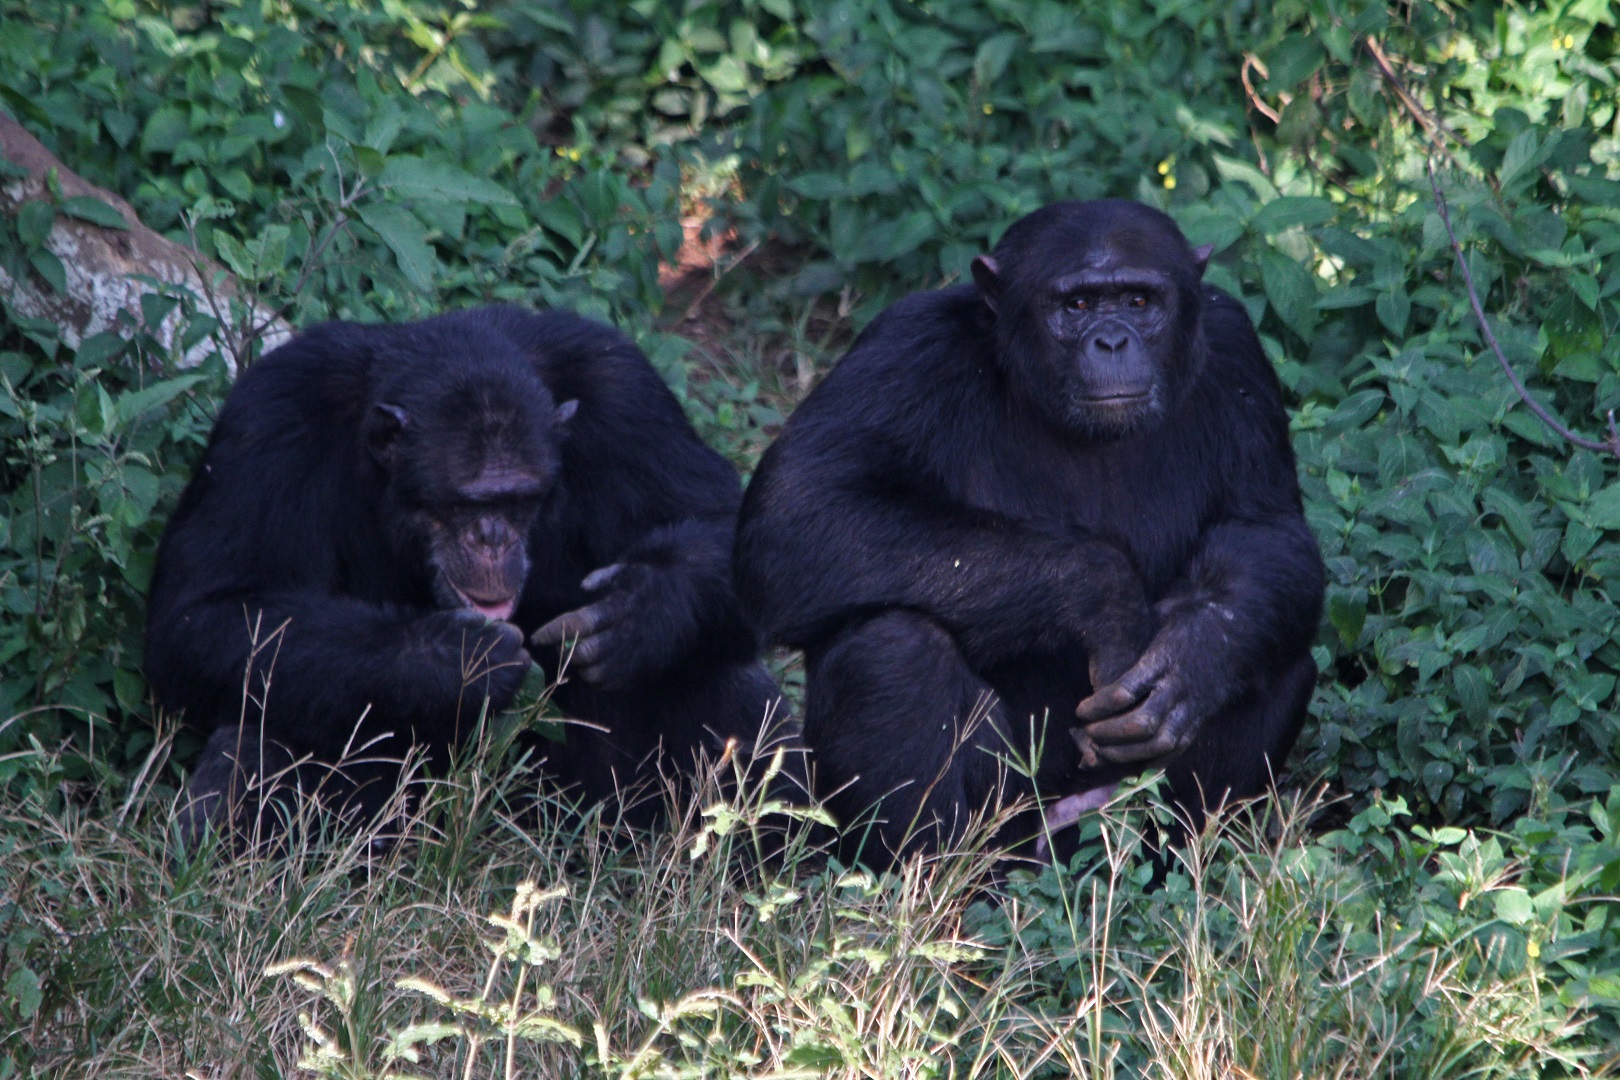 Chimpanzees sitting together in the forest